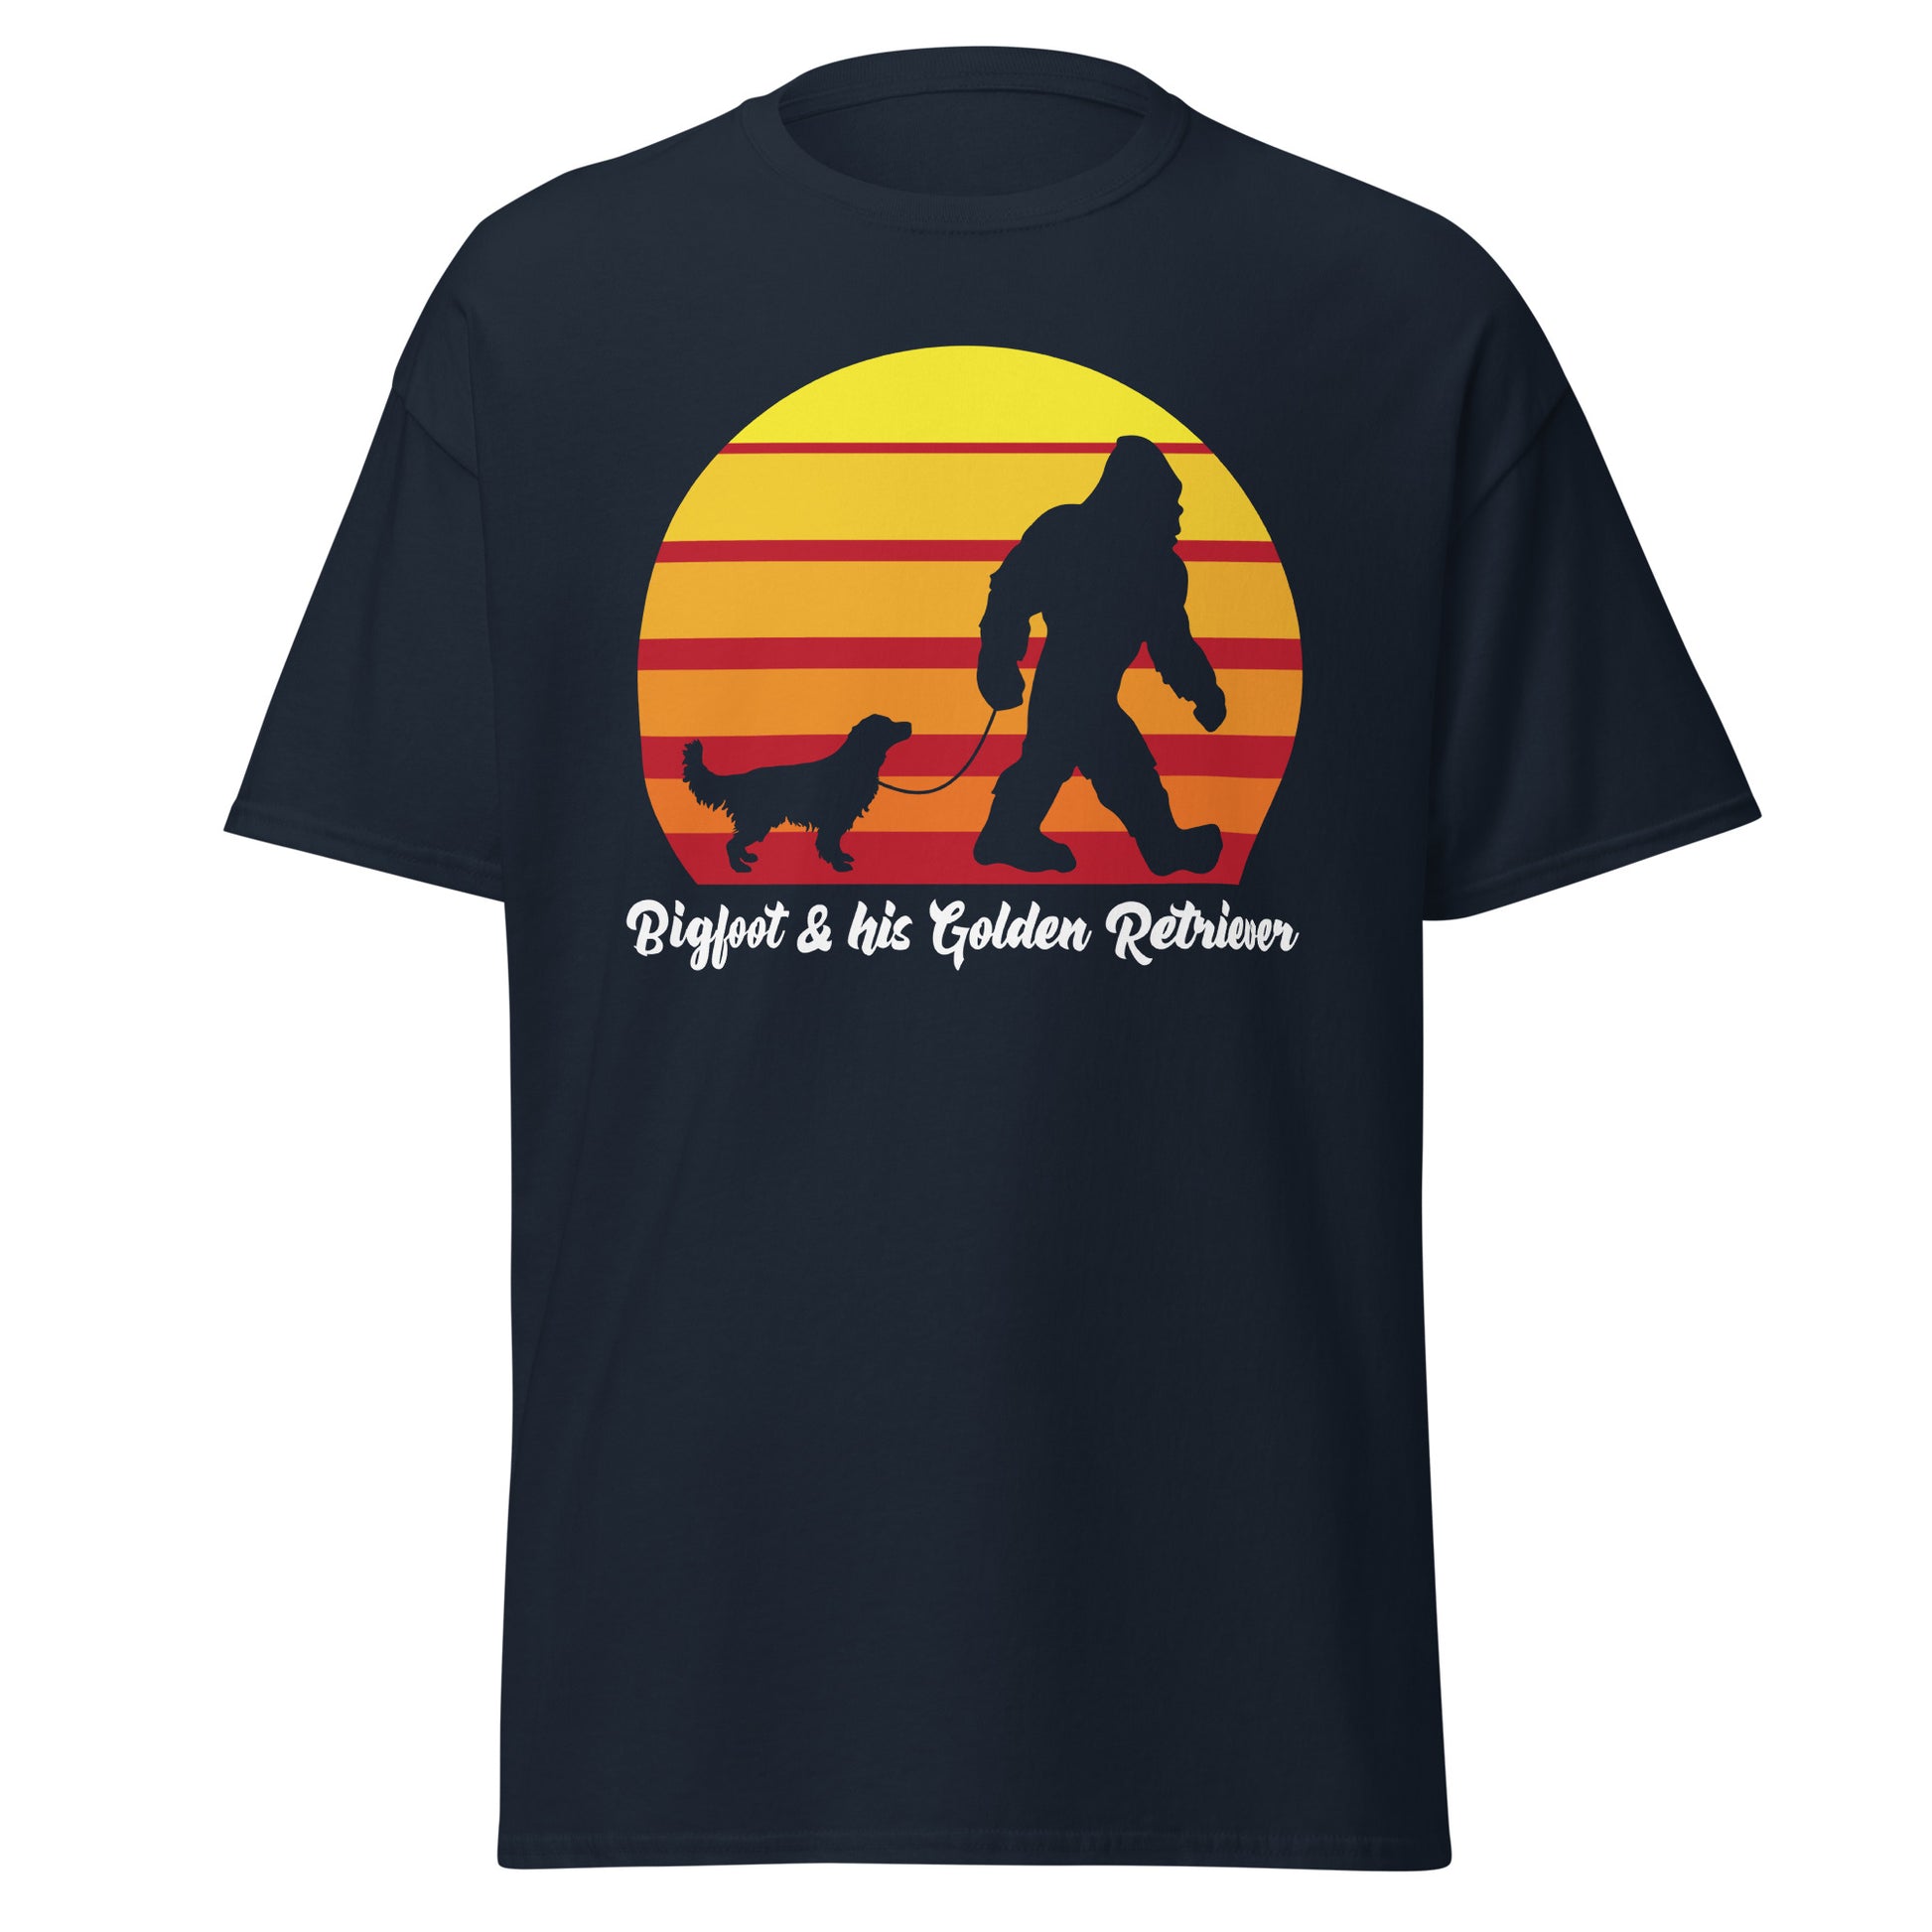 Bigfoot and his Golden Retriever men’s navy t-shirt by Dog Artistry.